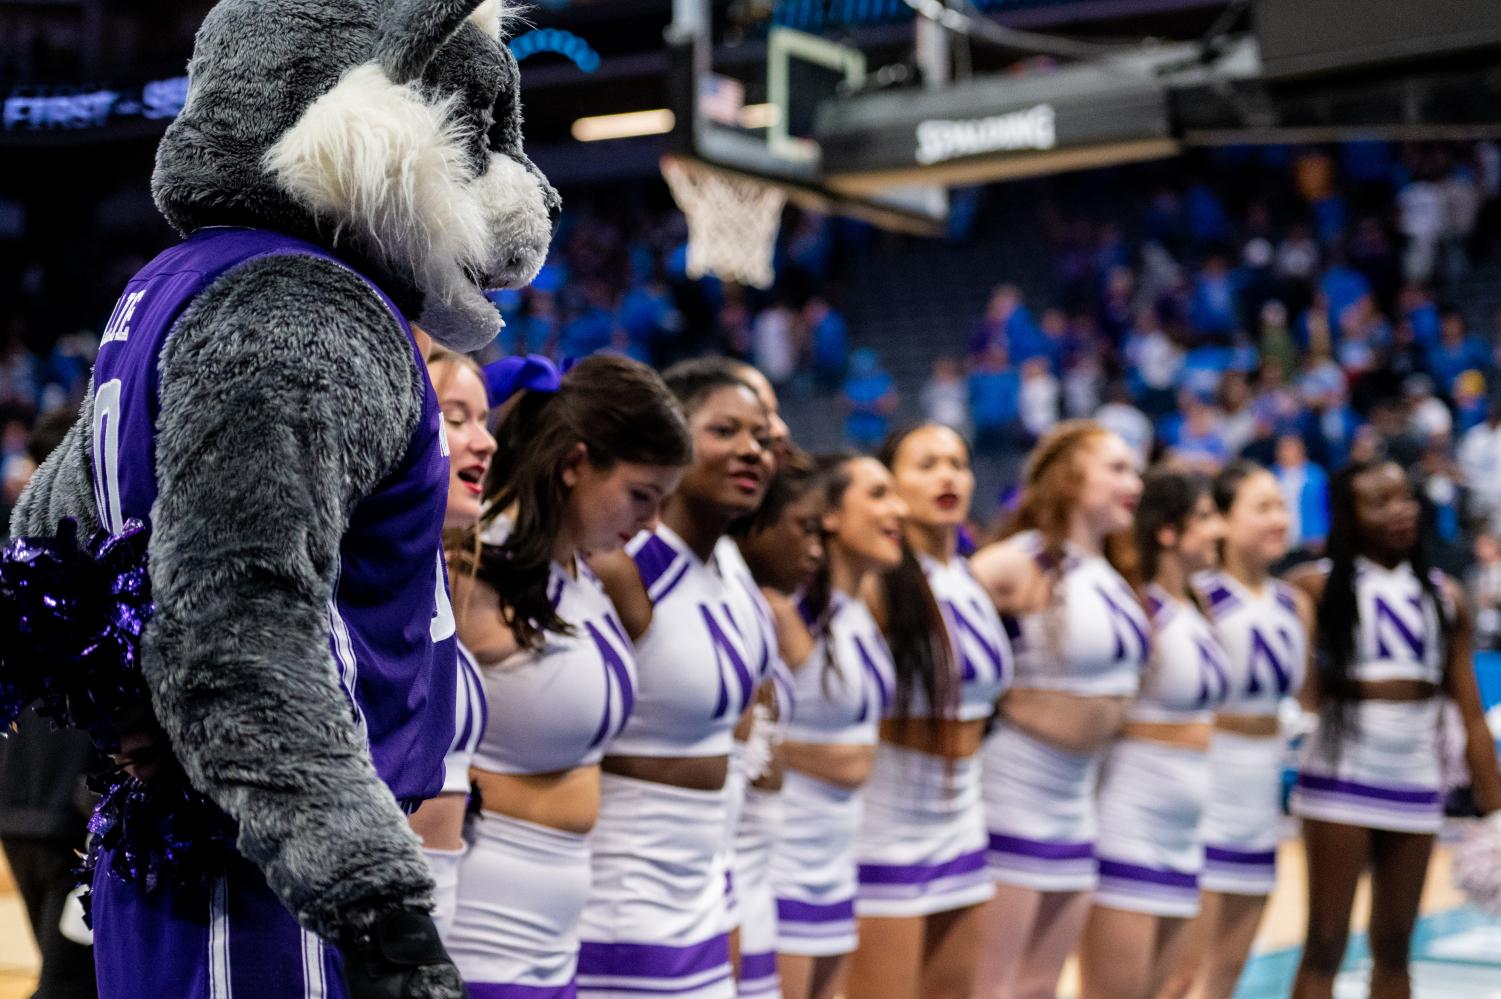 A group of cheerleaders in white-and-purple stand together next to a gray wildcat mascot wearing a purple jersey.